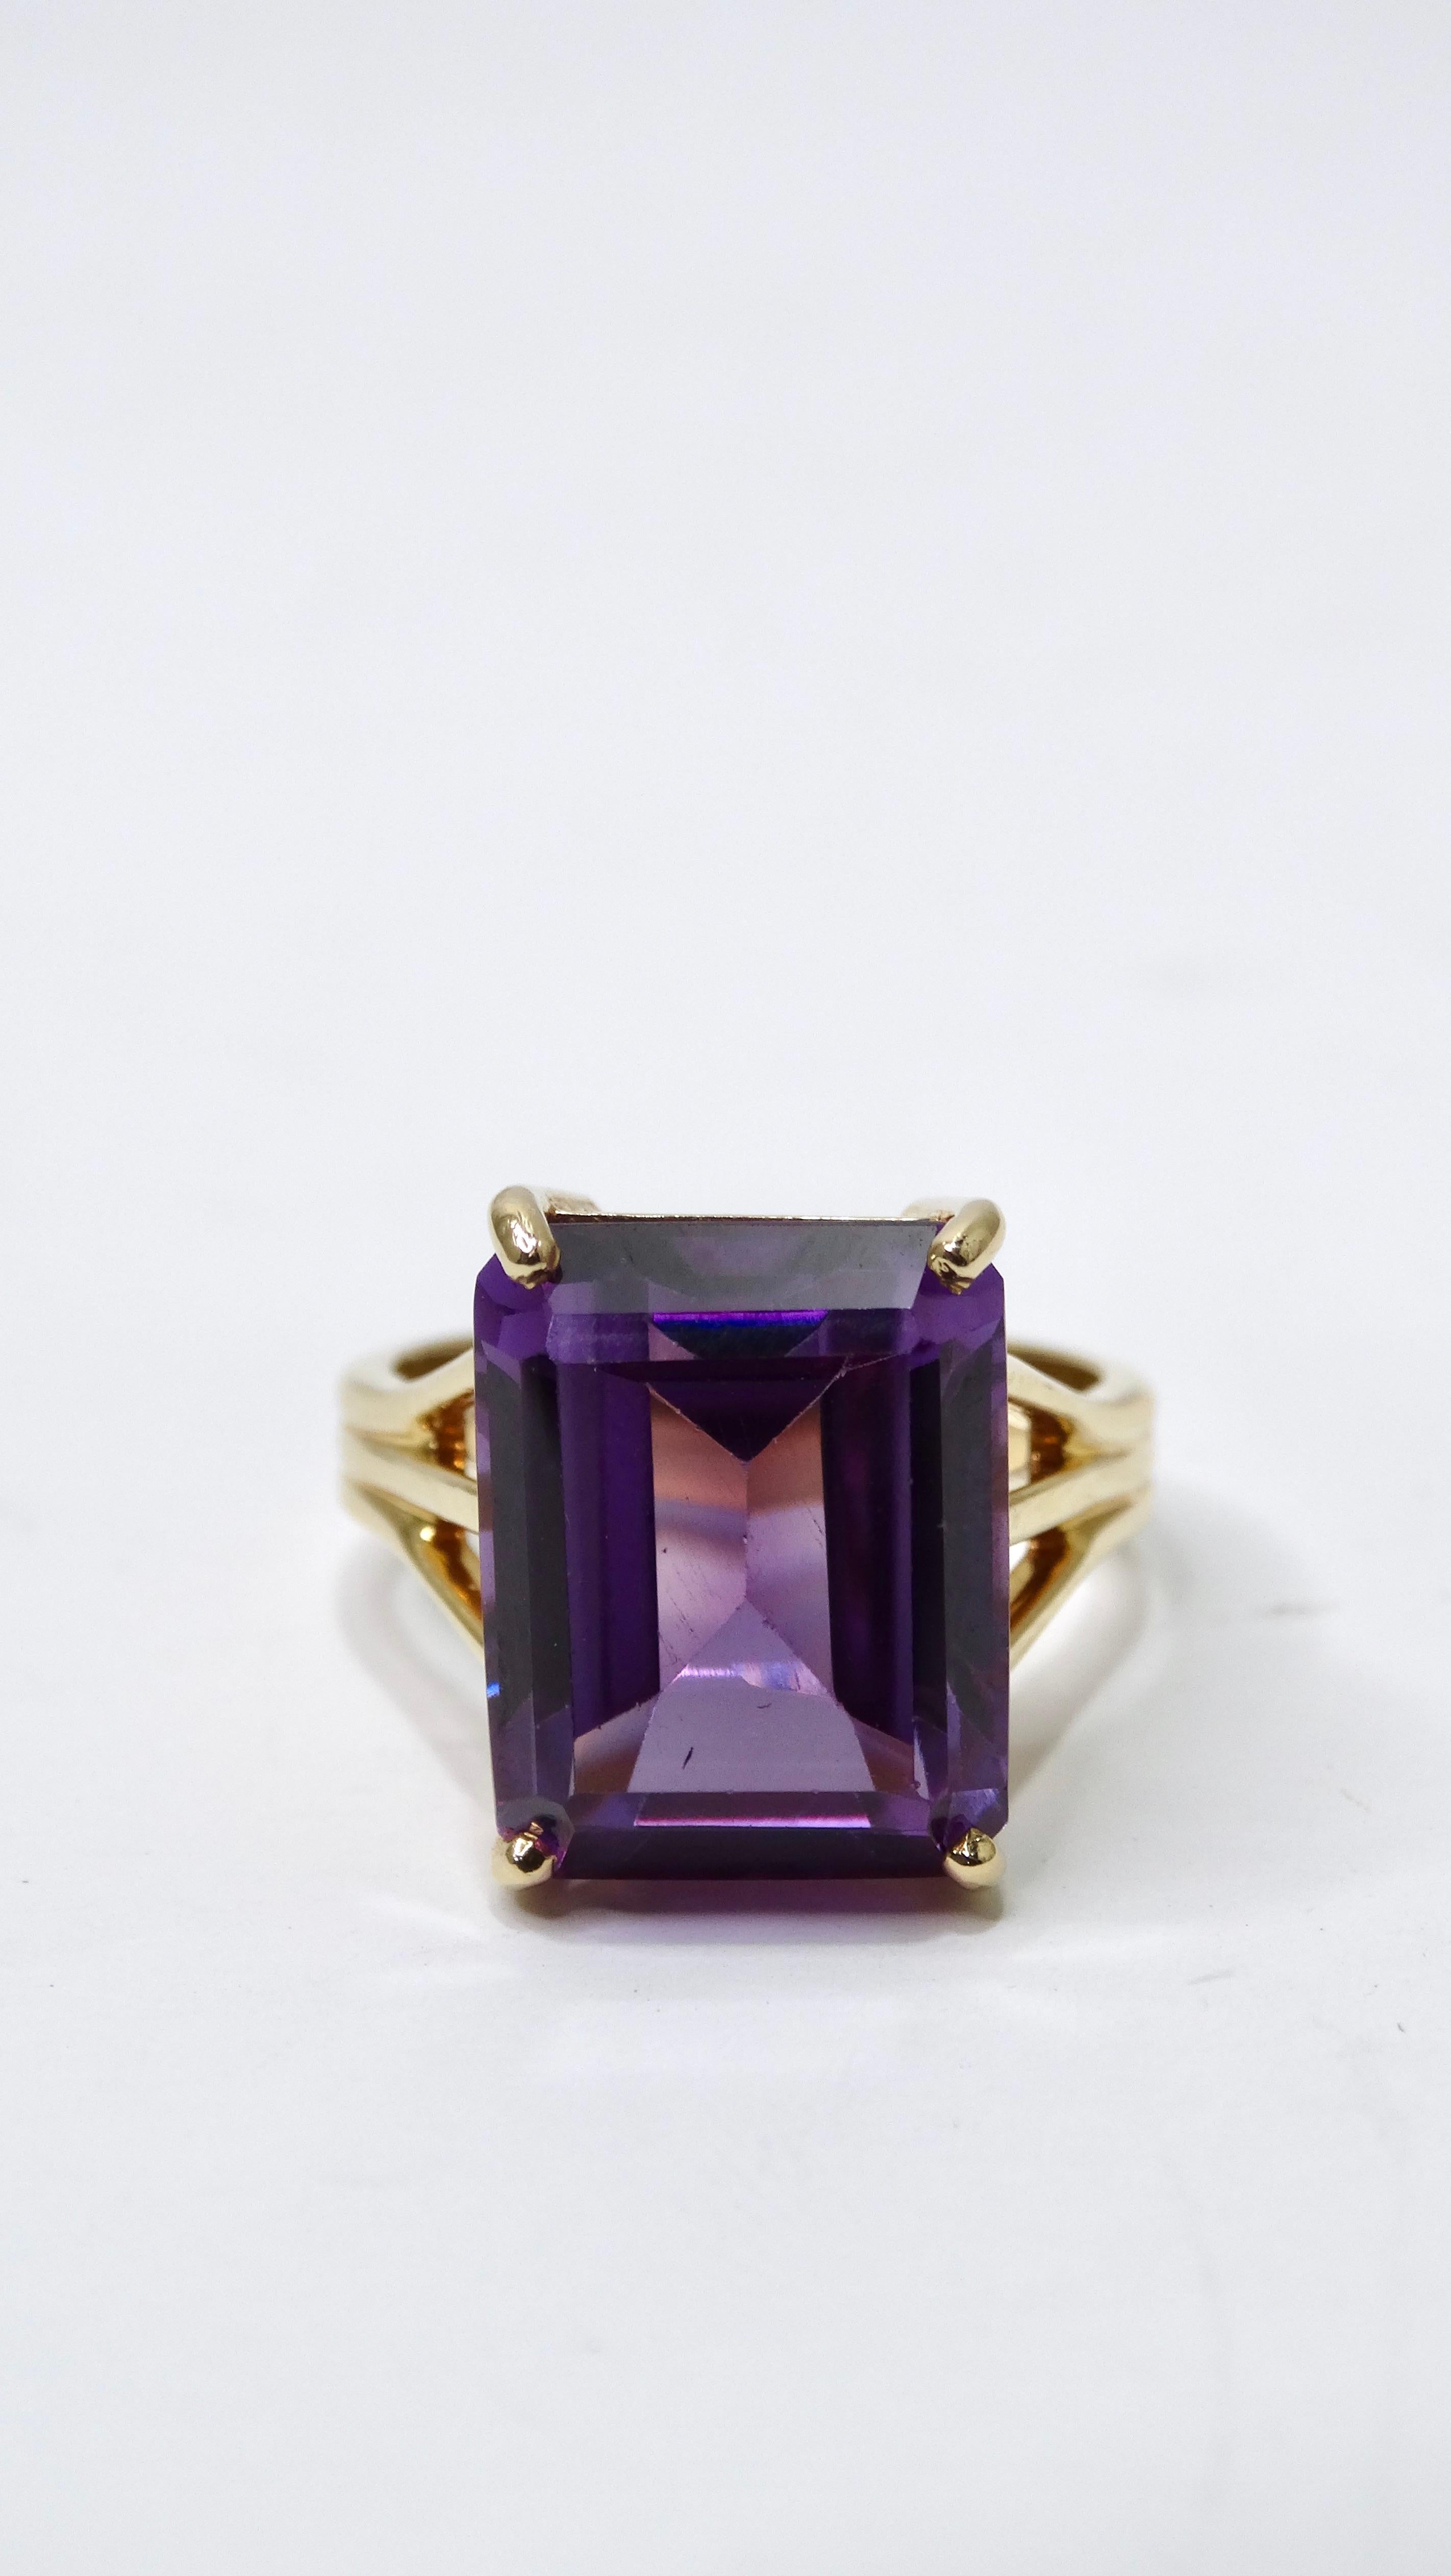 This impeccably designed ring can be yours today! Don't miss your chance to get your hands on this beautiful Amethyst stone (approx. 10 ctw) in an emerald cut. Amethyst is a lilac variety of quartz and it provides spiritual healing, calmness, and